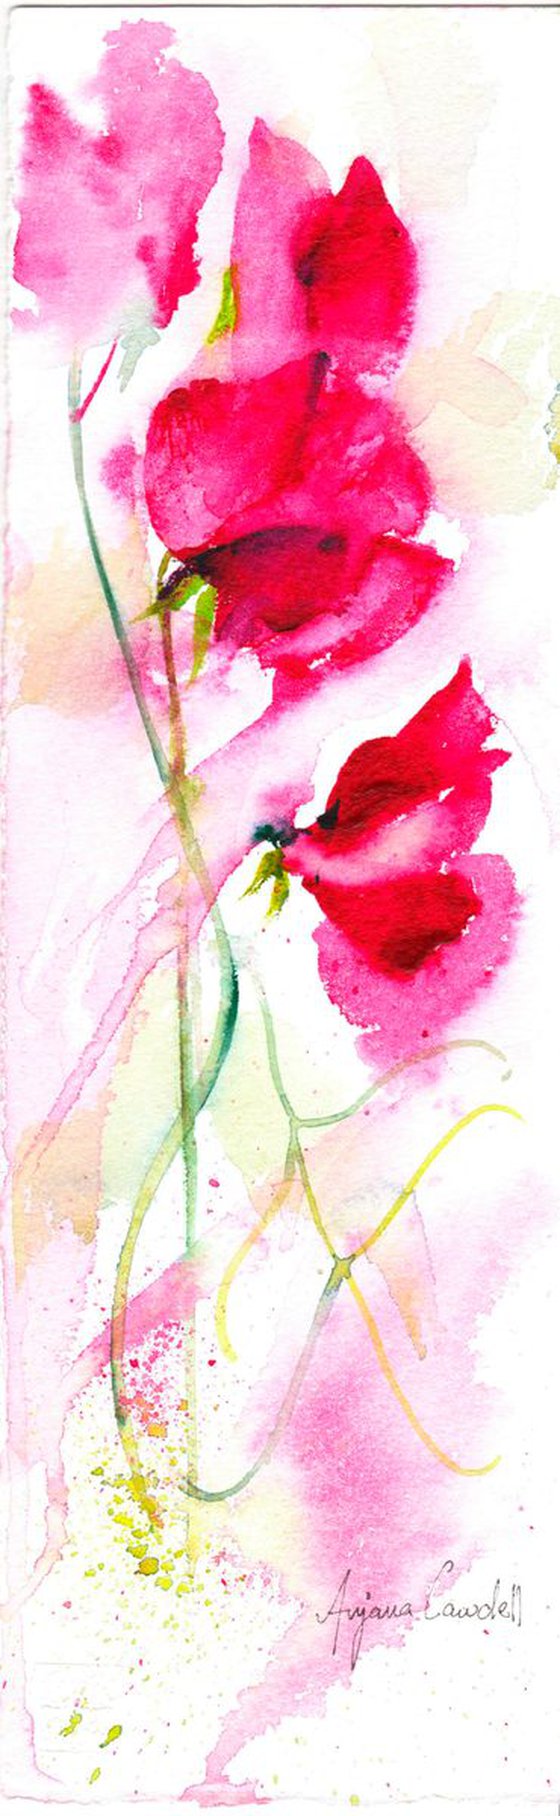 Red Sweetpea Painting, Floral Art, Original Watercolour painting, Mini Art, Small painting, Contemporary Floral, Deep Pink